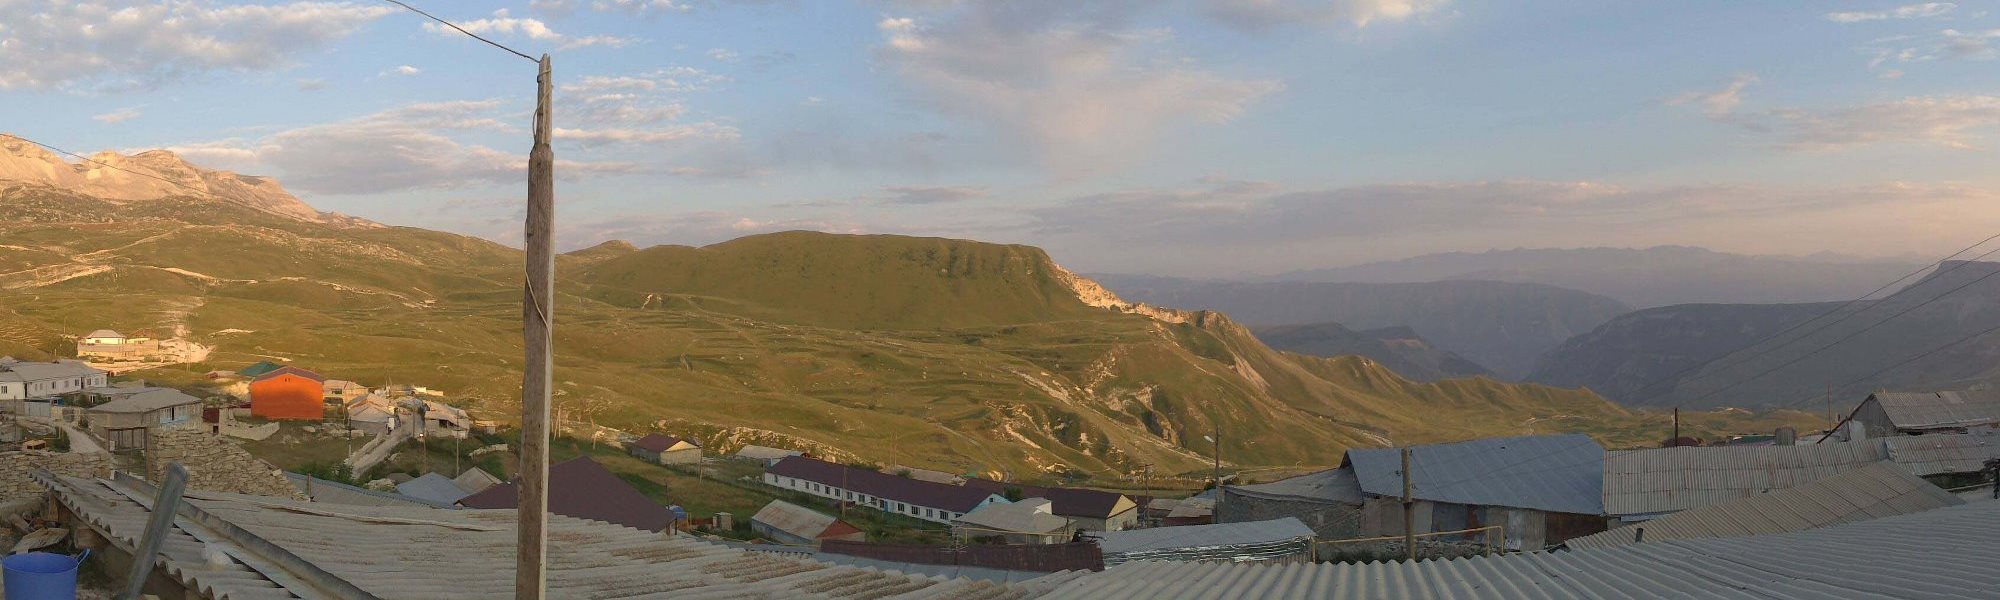 A look from the upper part of the Rikvani village, Andi-speaking area, Daghestan